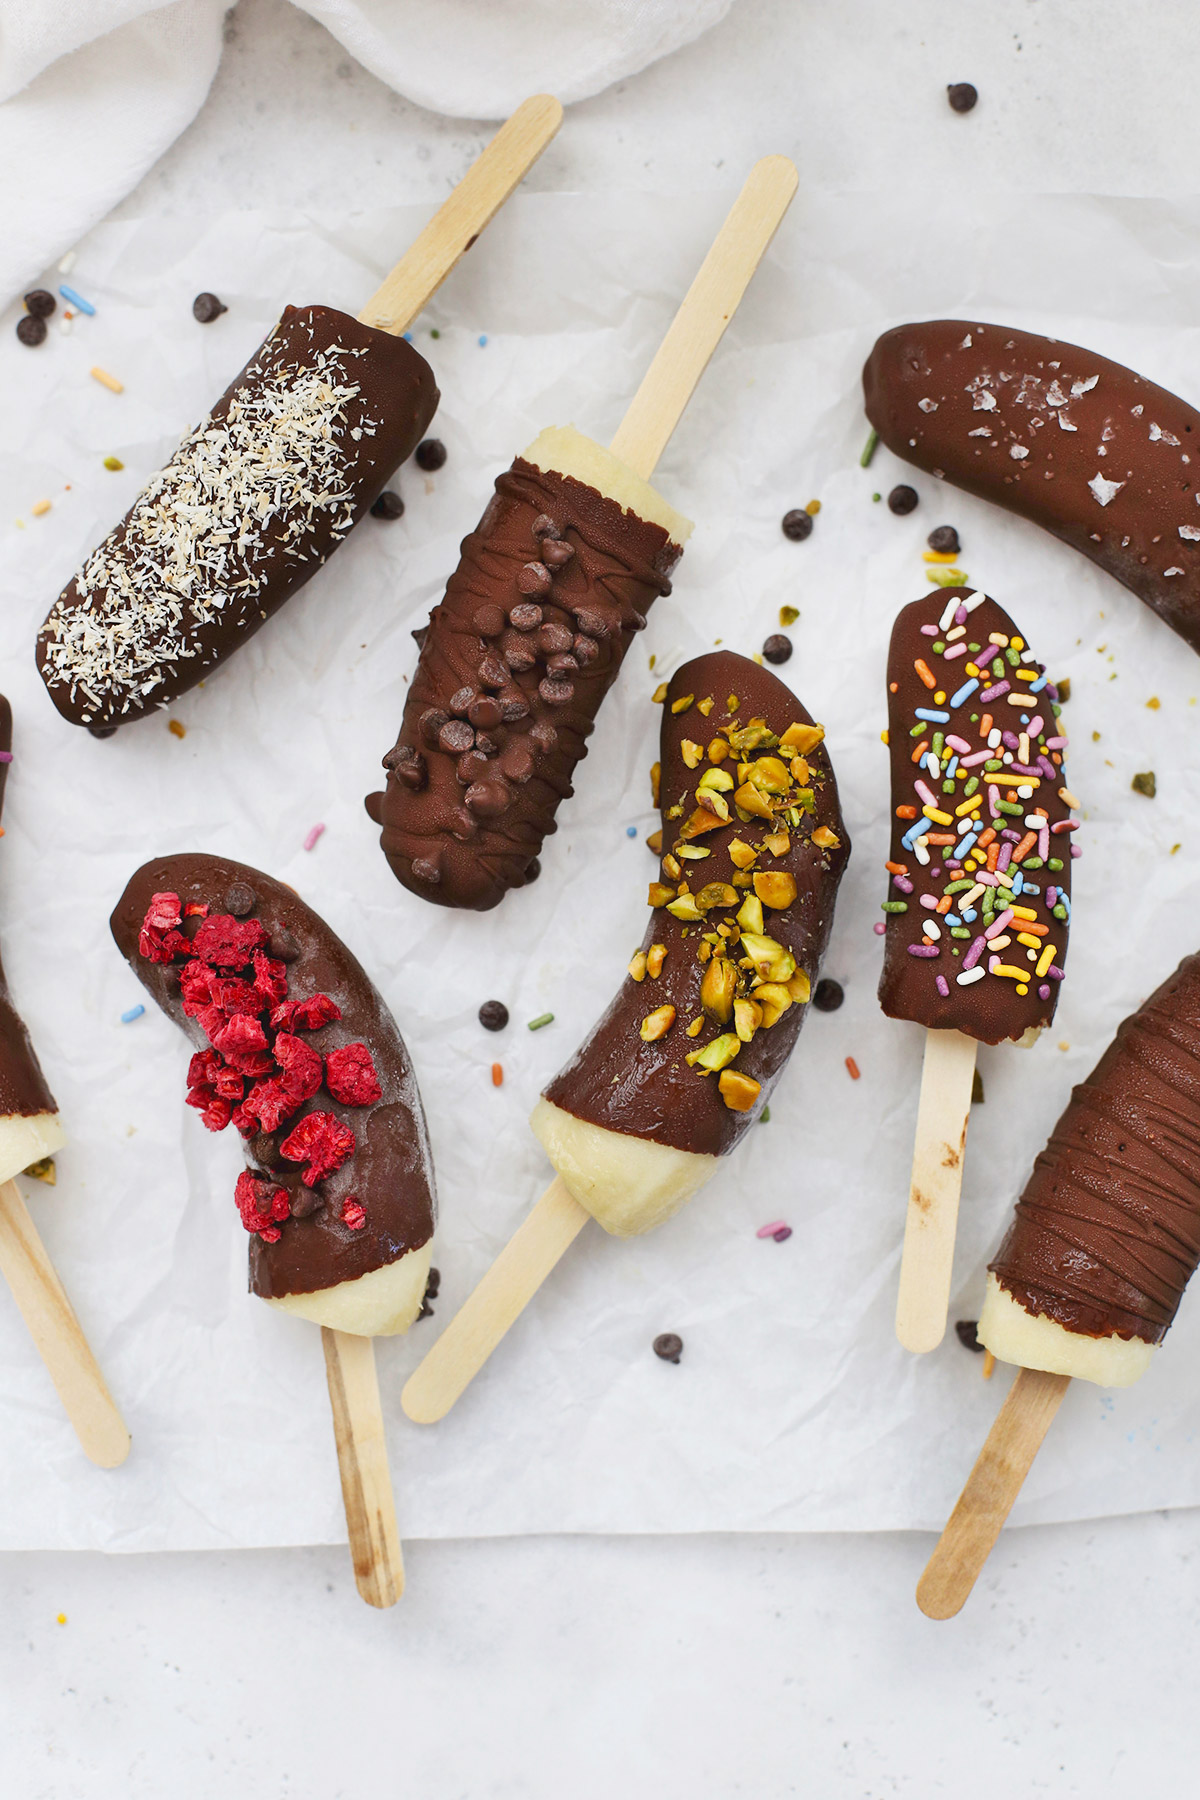 Frozen Chocolate Covered Bananas with different toppings scattered on a piece of parchment paper